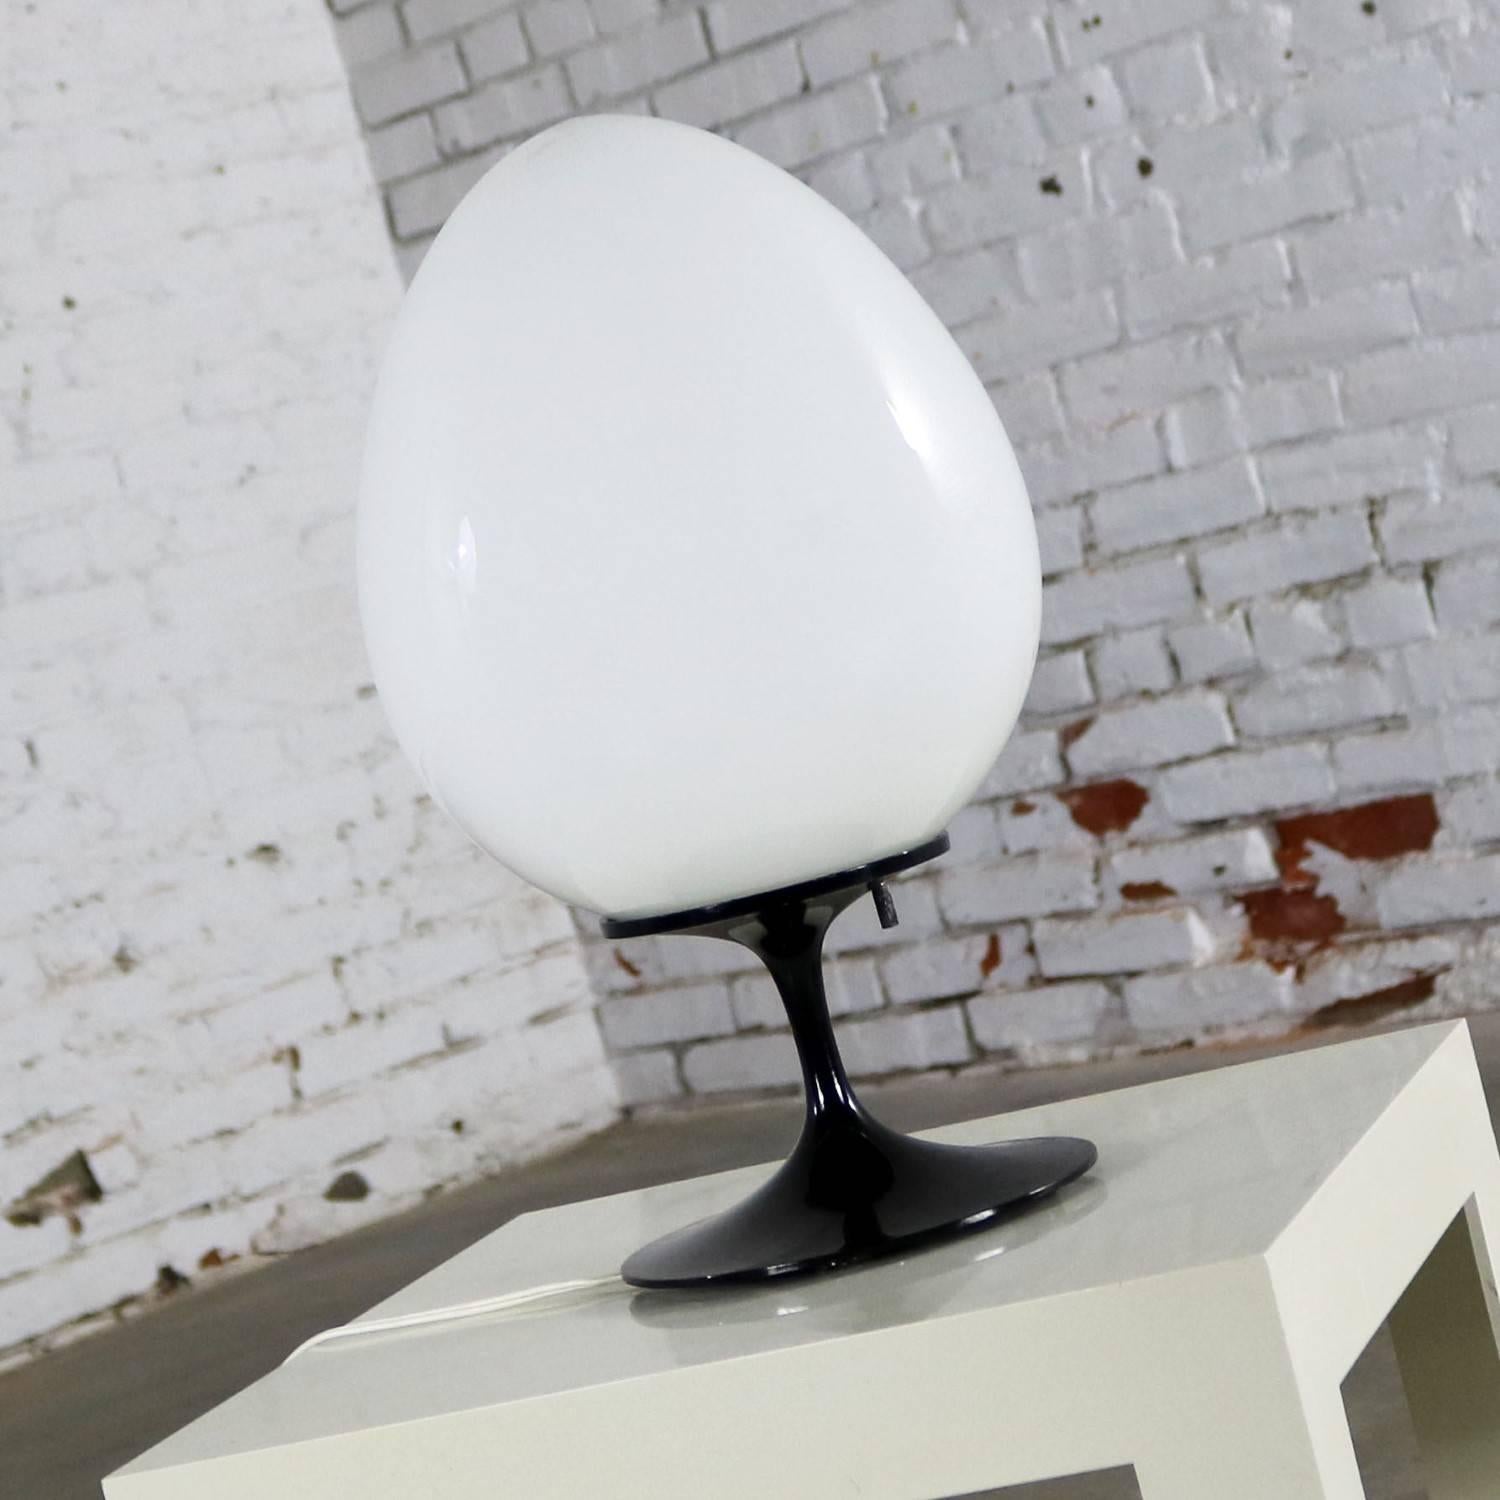 Fabulous circa 1960s Stemlite table lamp by Bill Curry for Design Line. This one’s tulip base is black, and it is sporting a white glass egg-shaped globe. It is in wonderful vintage working condition.

This incredible table lamp by Bill Curry is